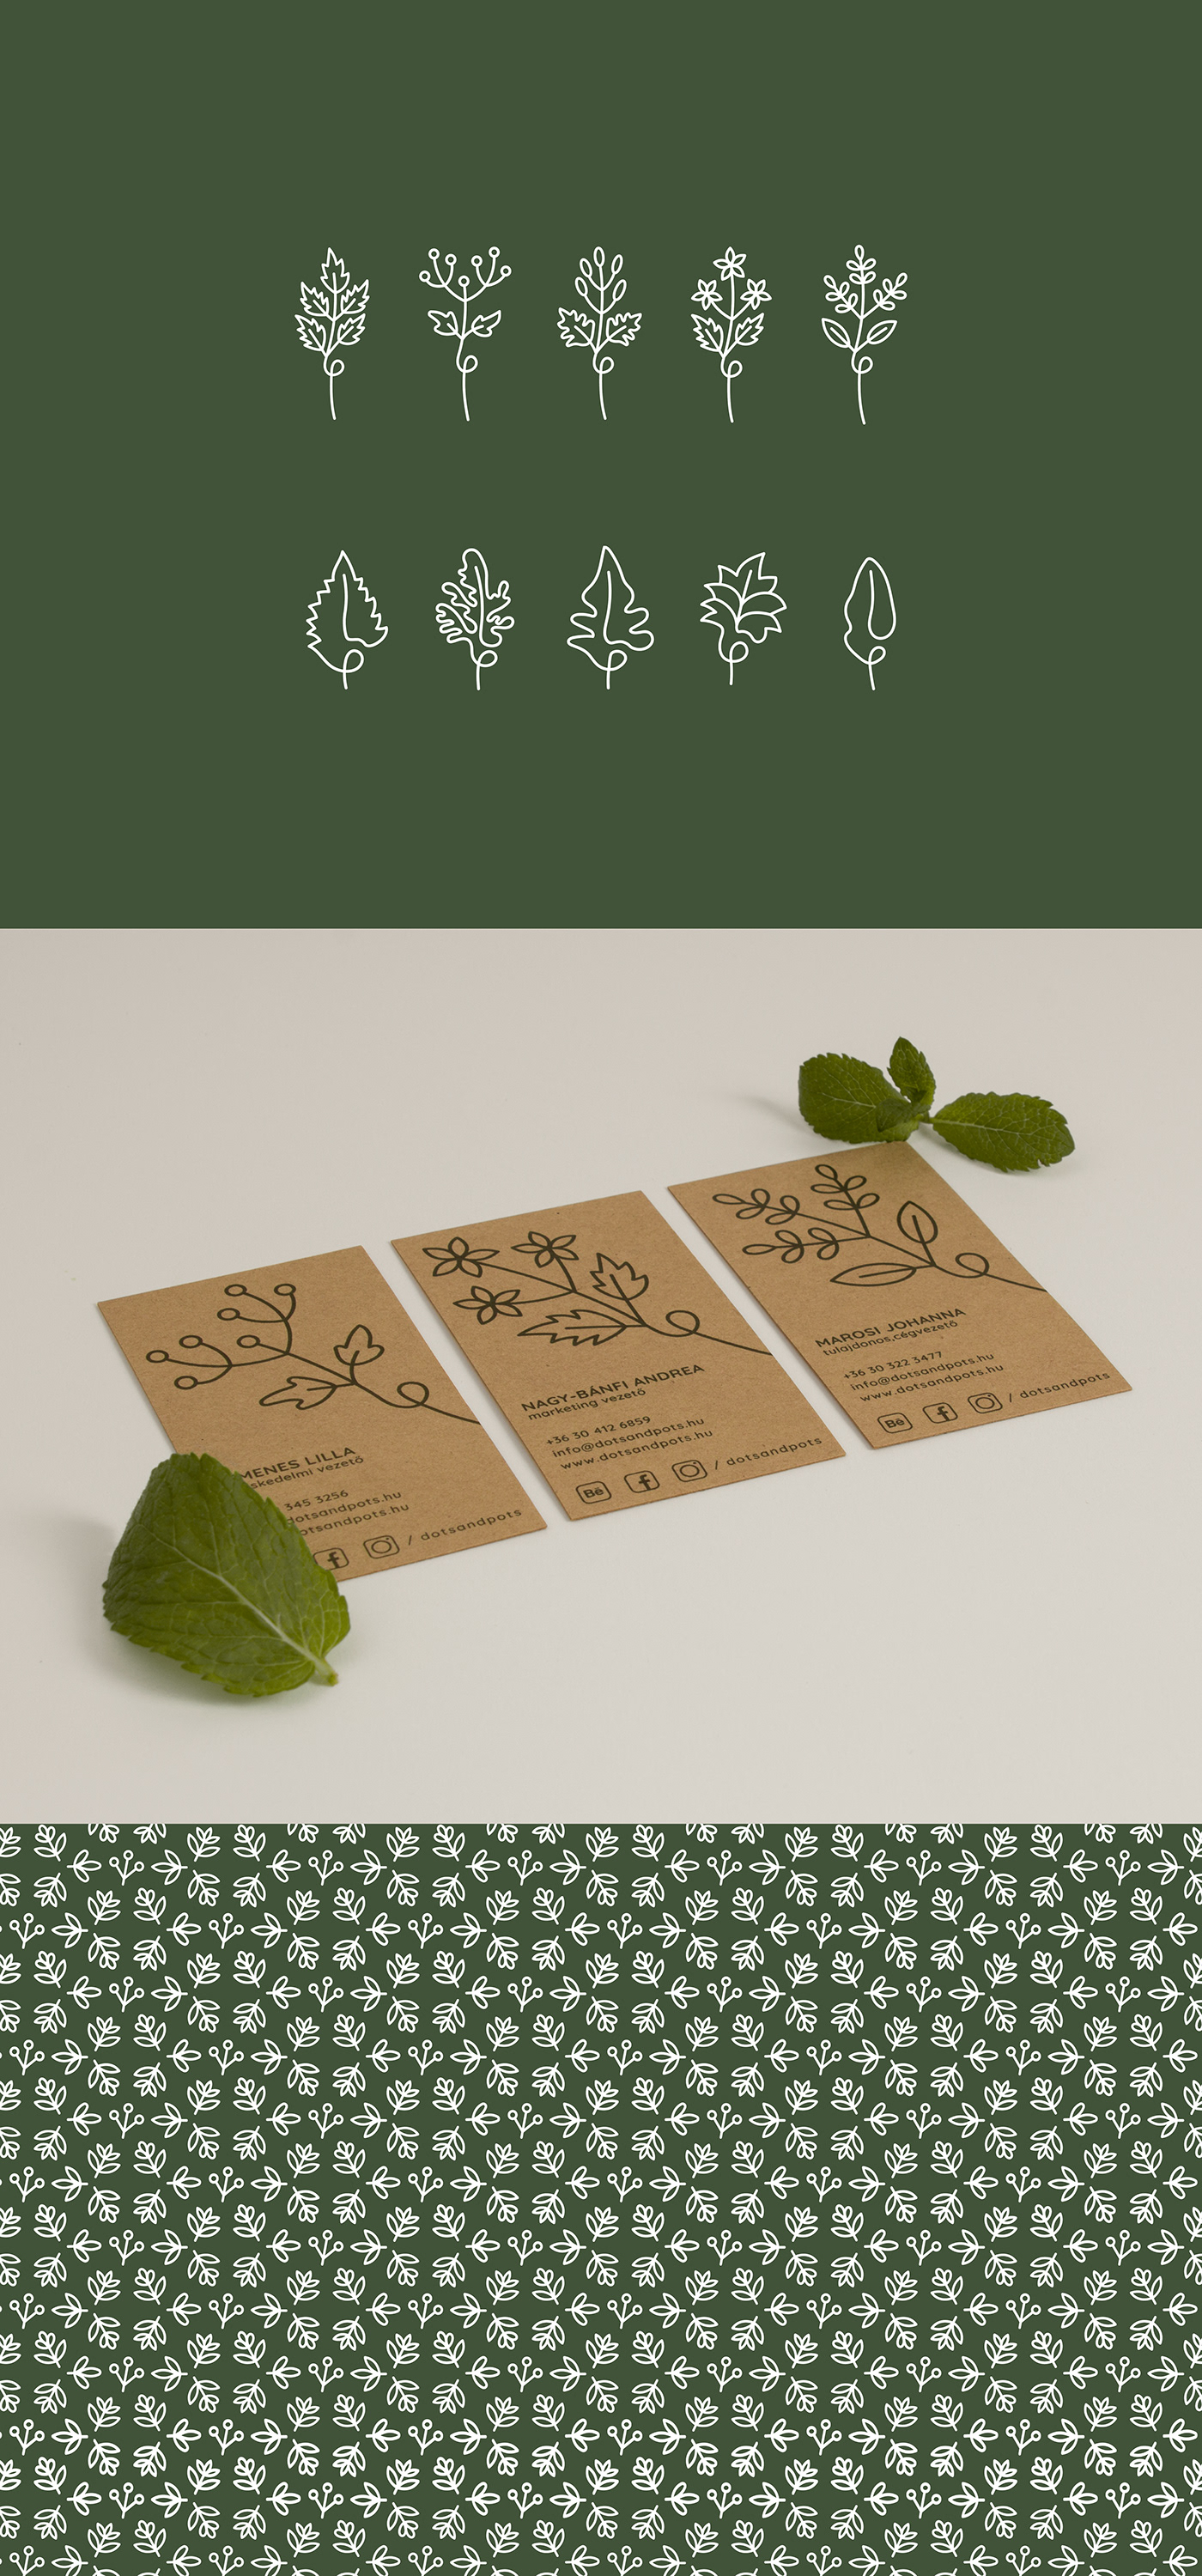 environmentally conscious graphic design  ILLUSTRATION  Packaging planting kit plants